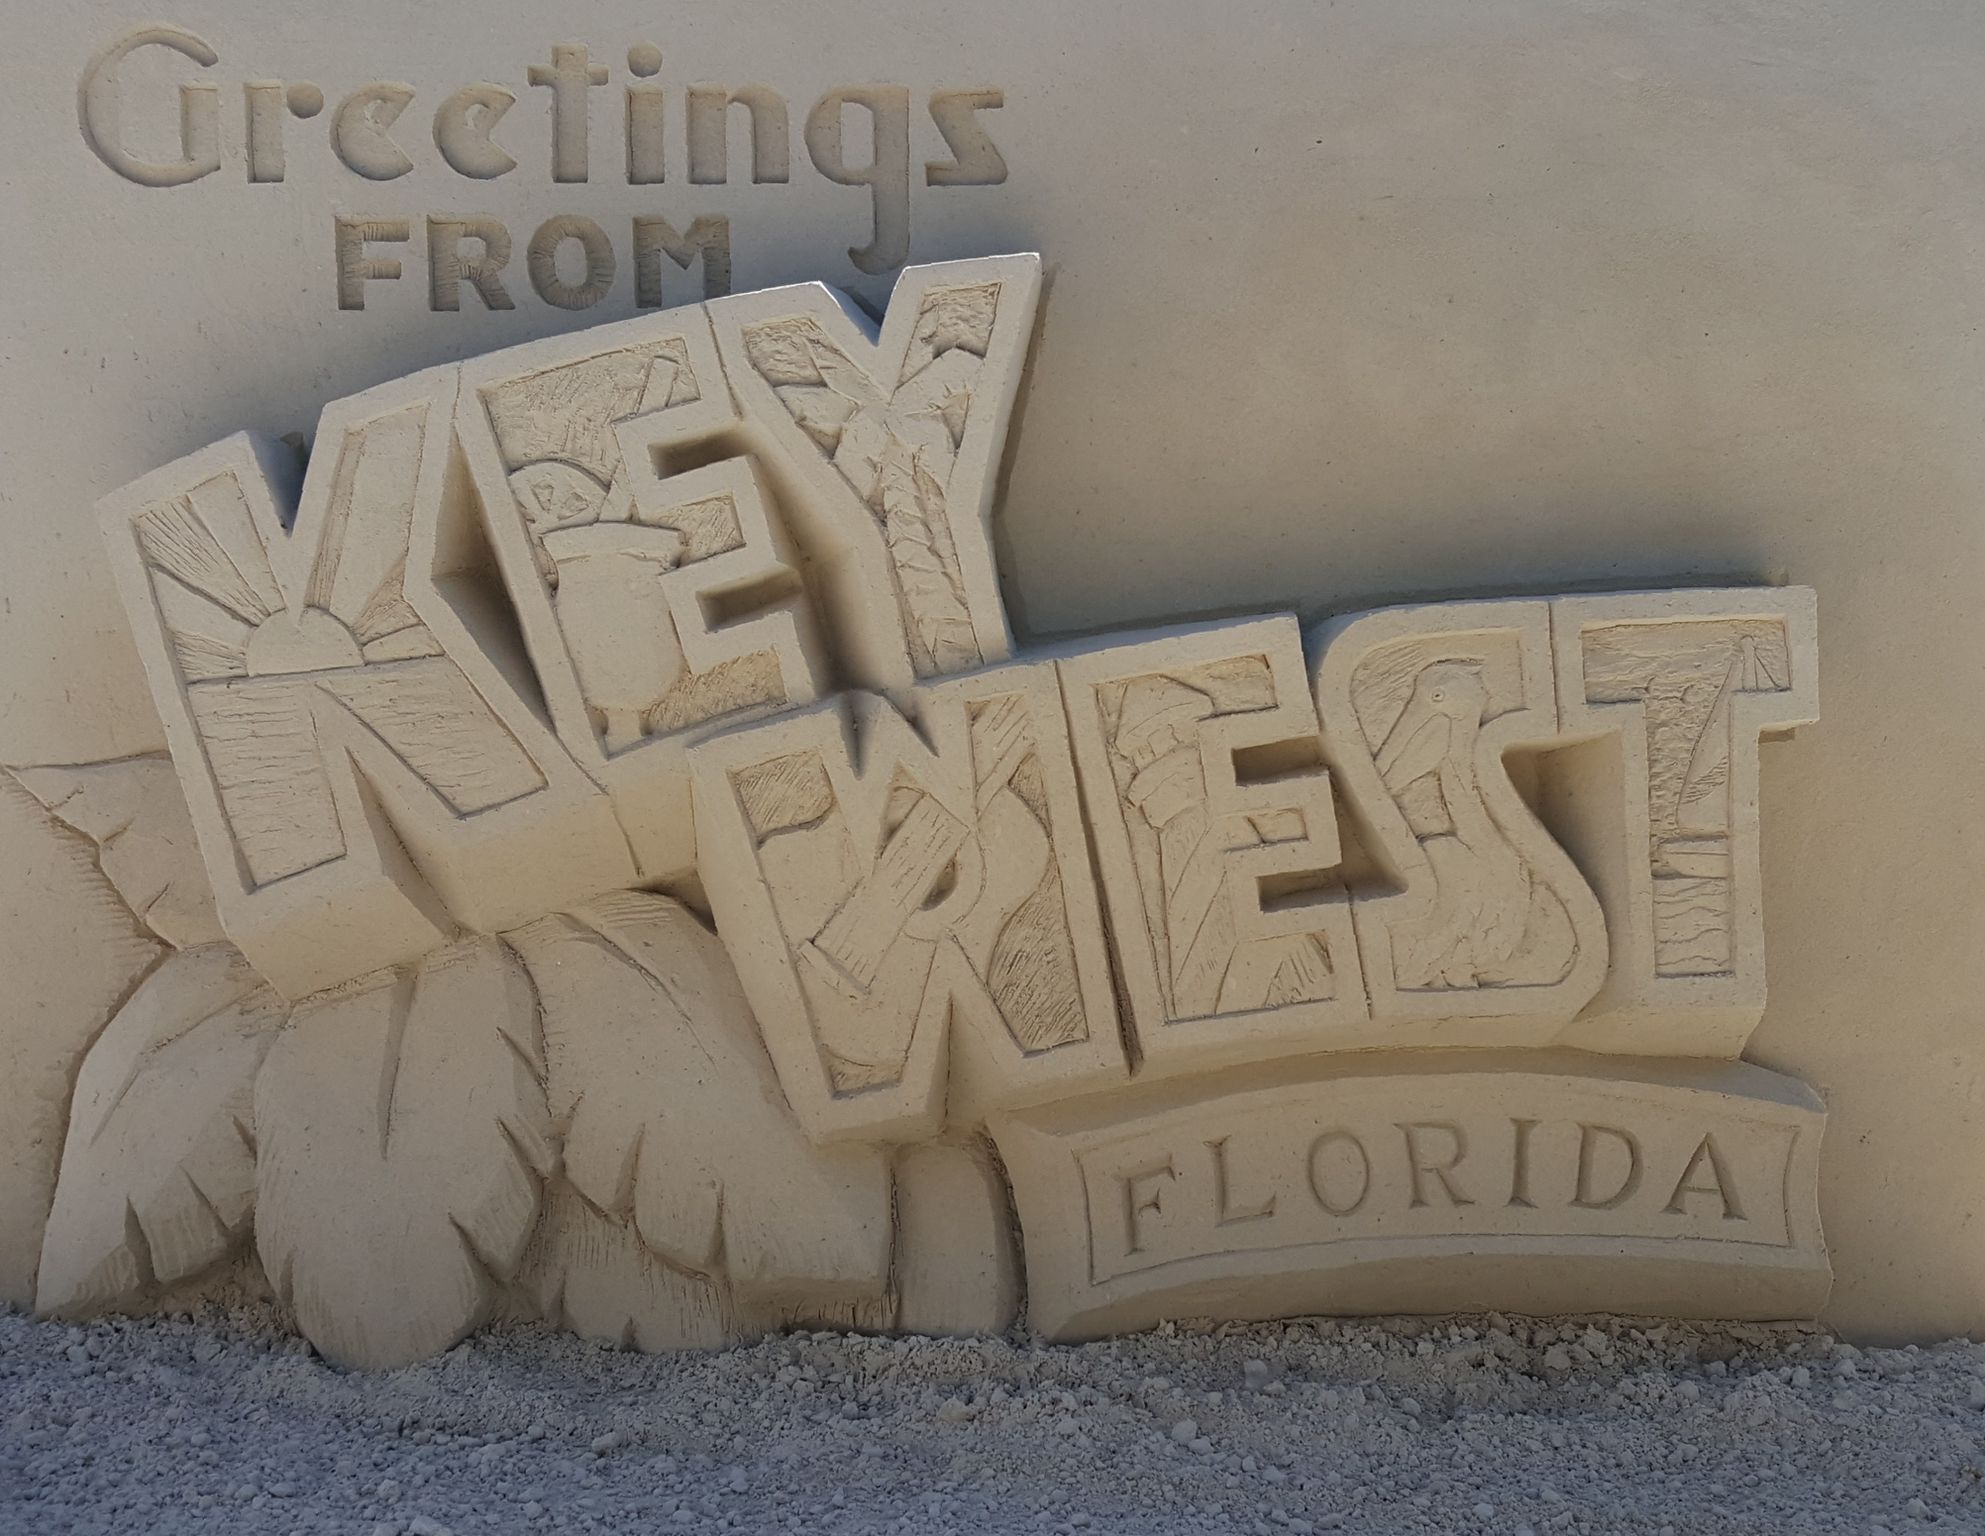 Greetings from Key West sand sculpture